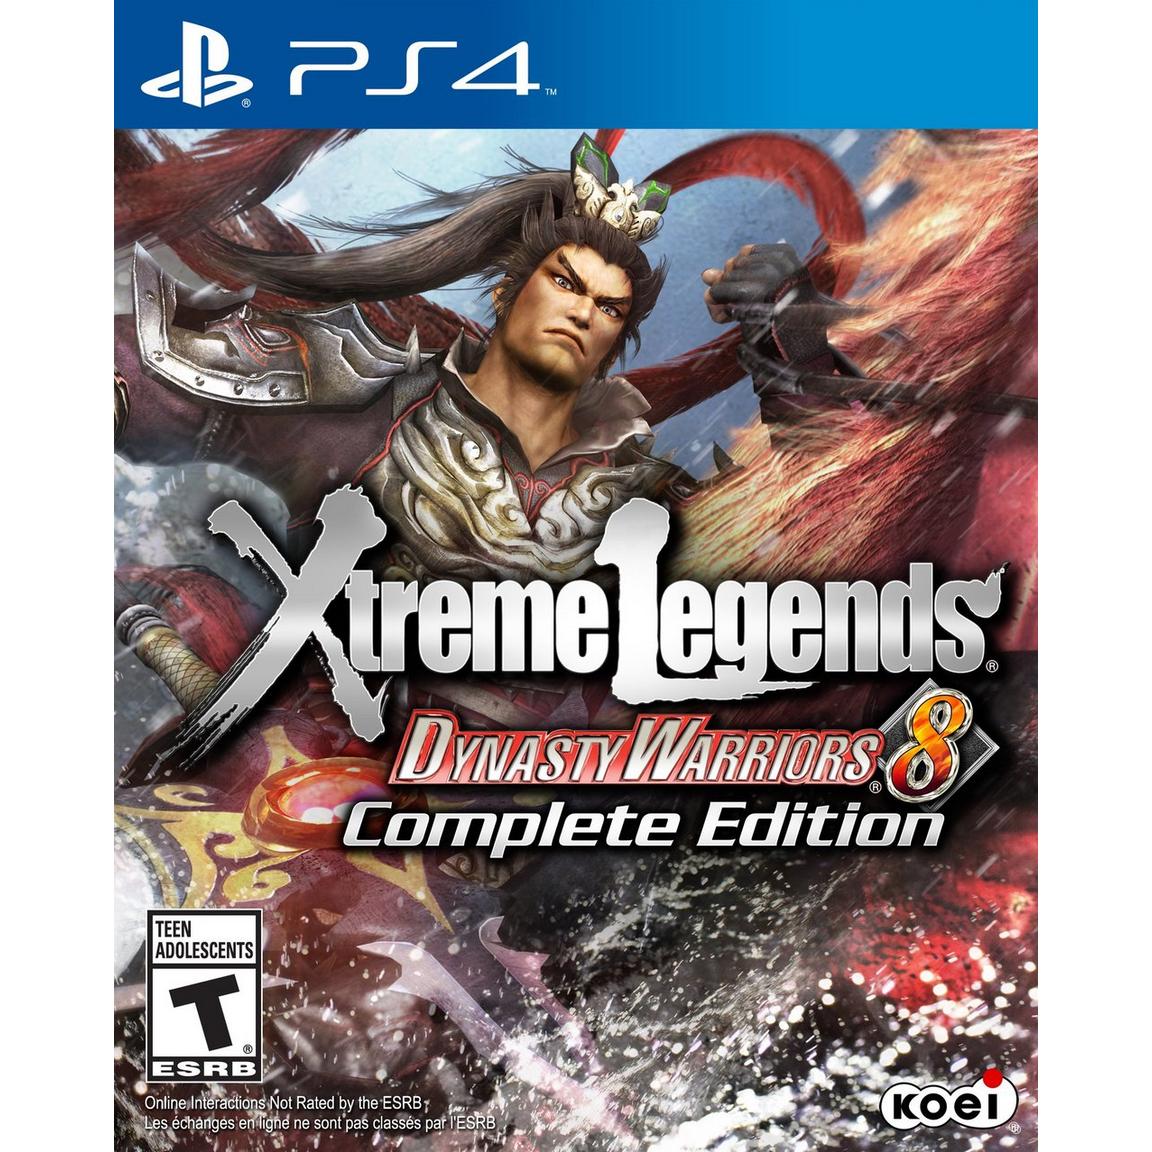 Dynasty Warriors 8 Xtreme Legends Complete Edition - PlayStation 4, Pre-Owned -  Koei Tecmo